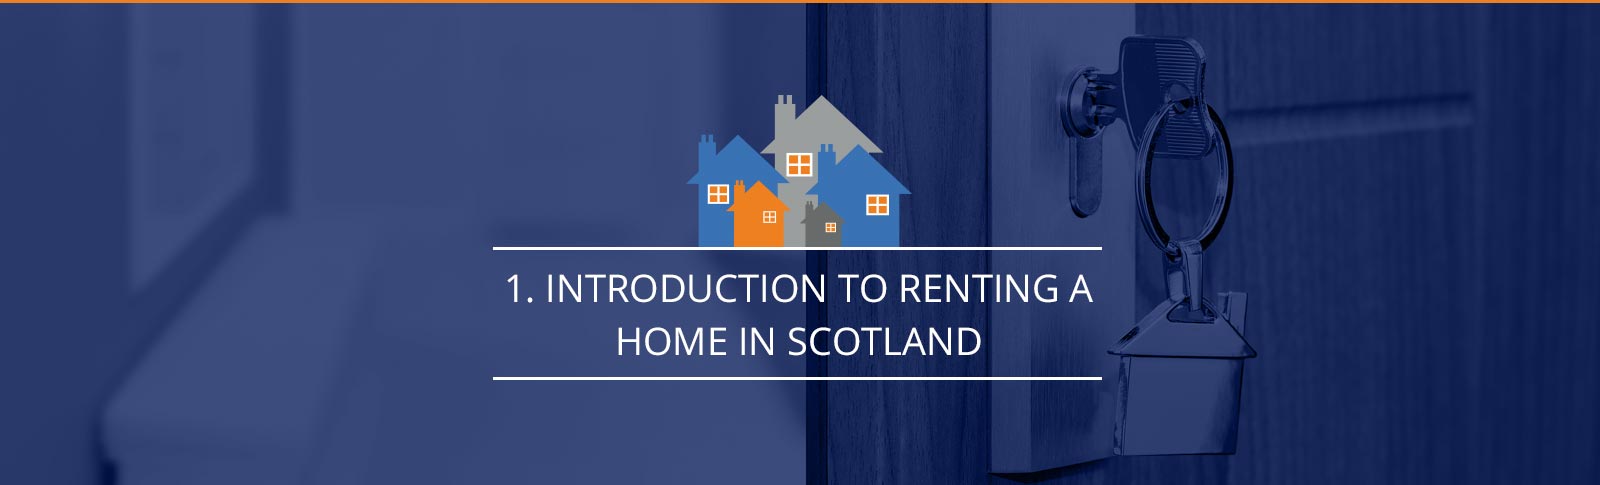 Introduction to renting a property in Scotland